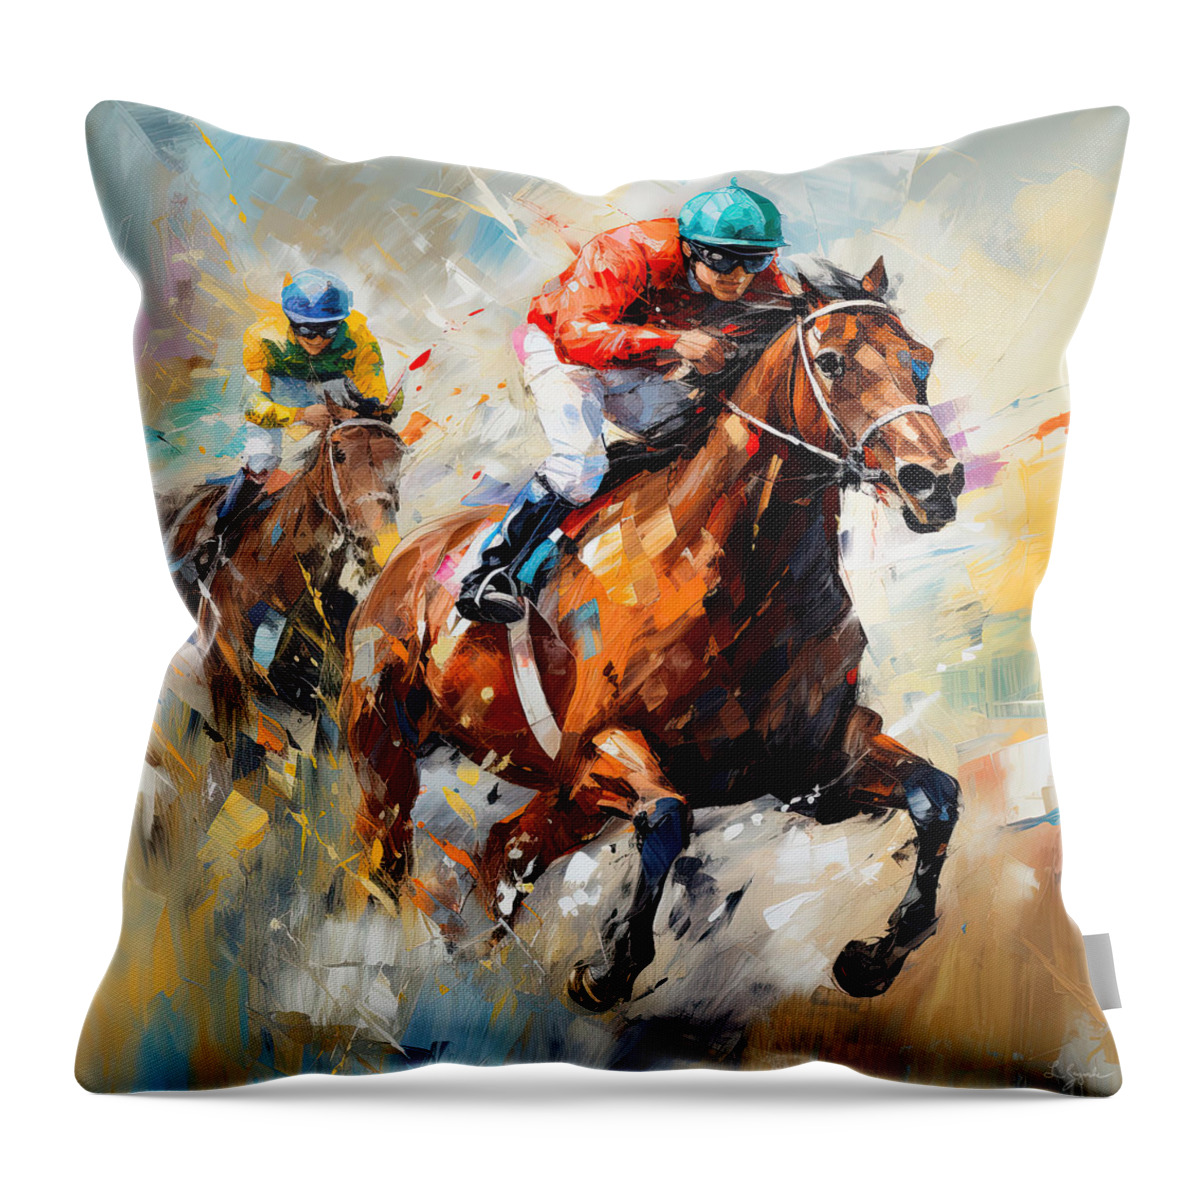 Horse Racing Throw Pillow featuring the digital art Almost There - Oaklawn Horse Racing by Lourry Legarde